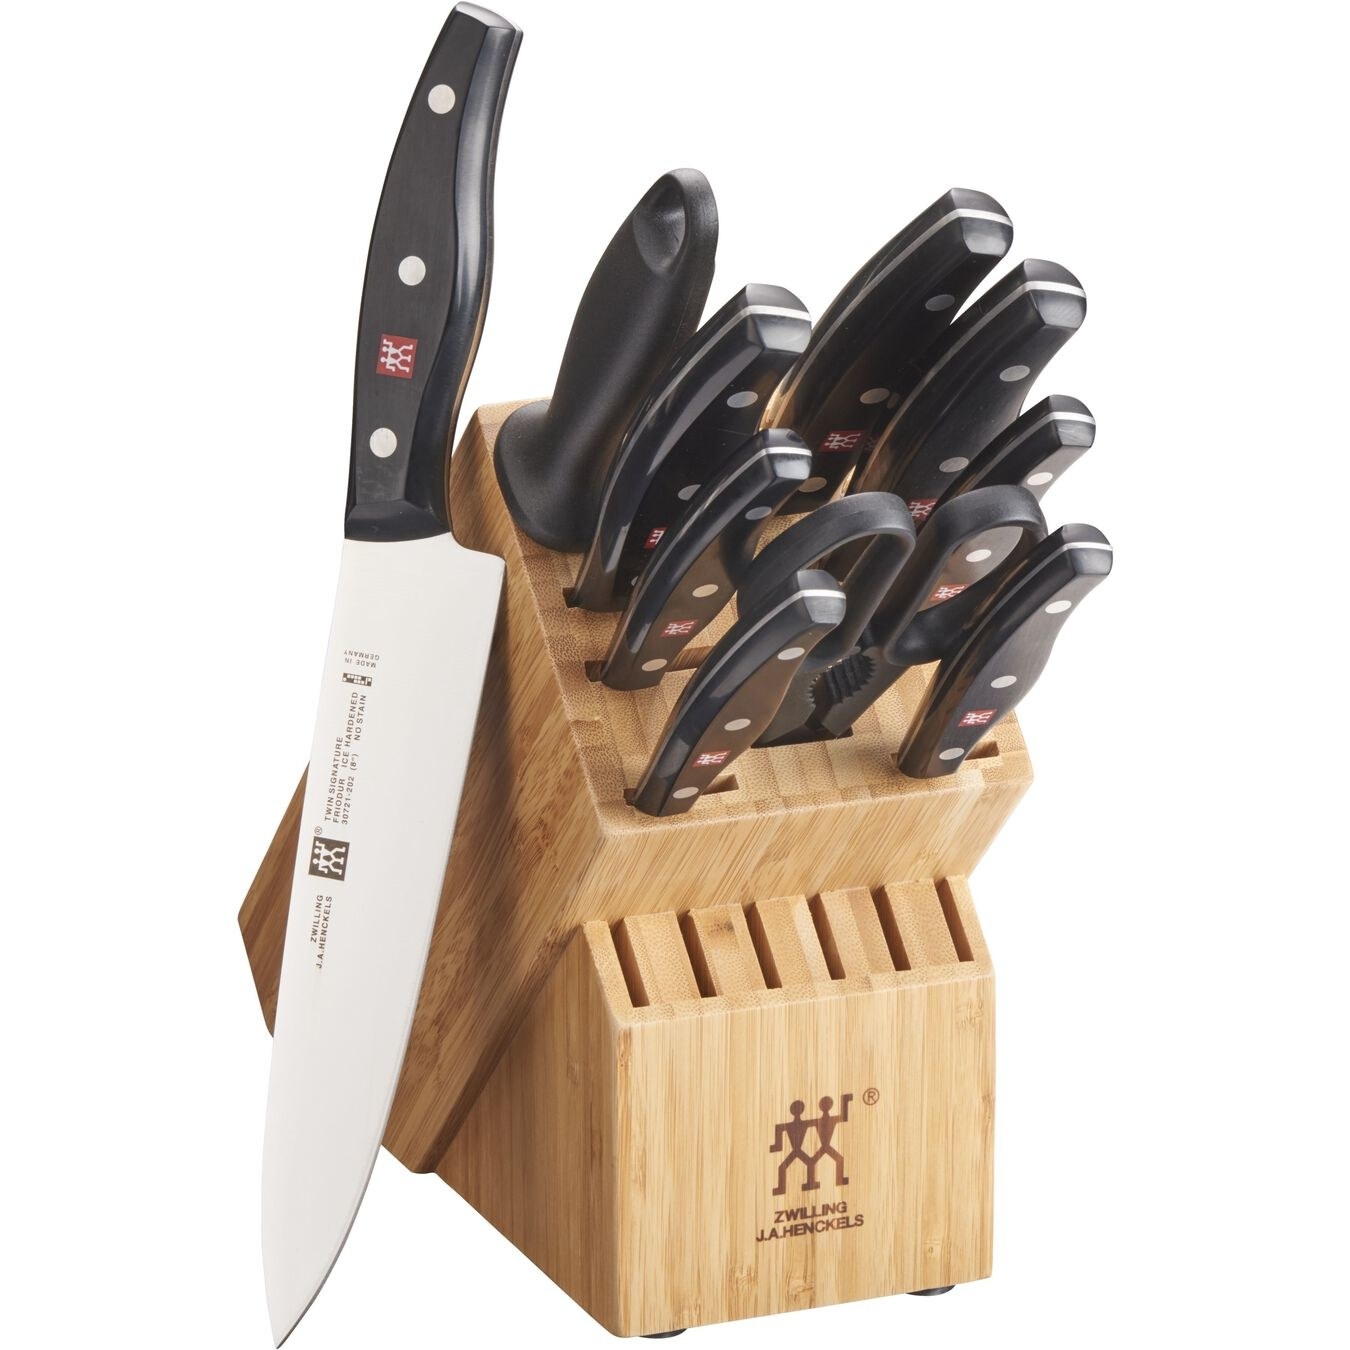 the 11-piece knife block set with silver knives, scissors, and a bamboo block